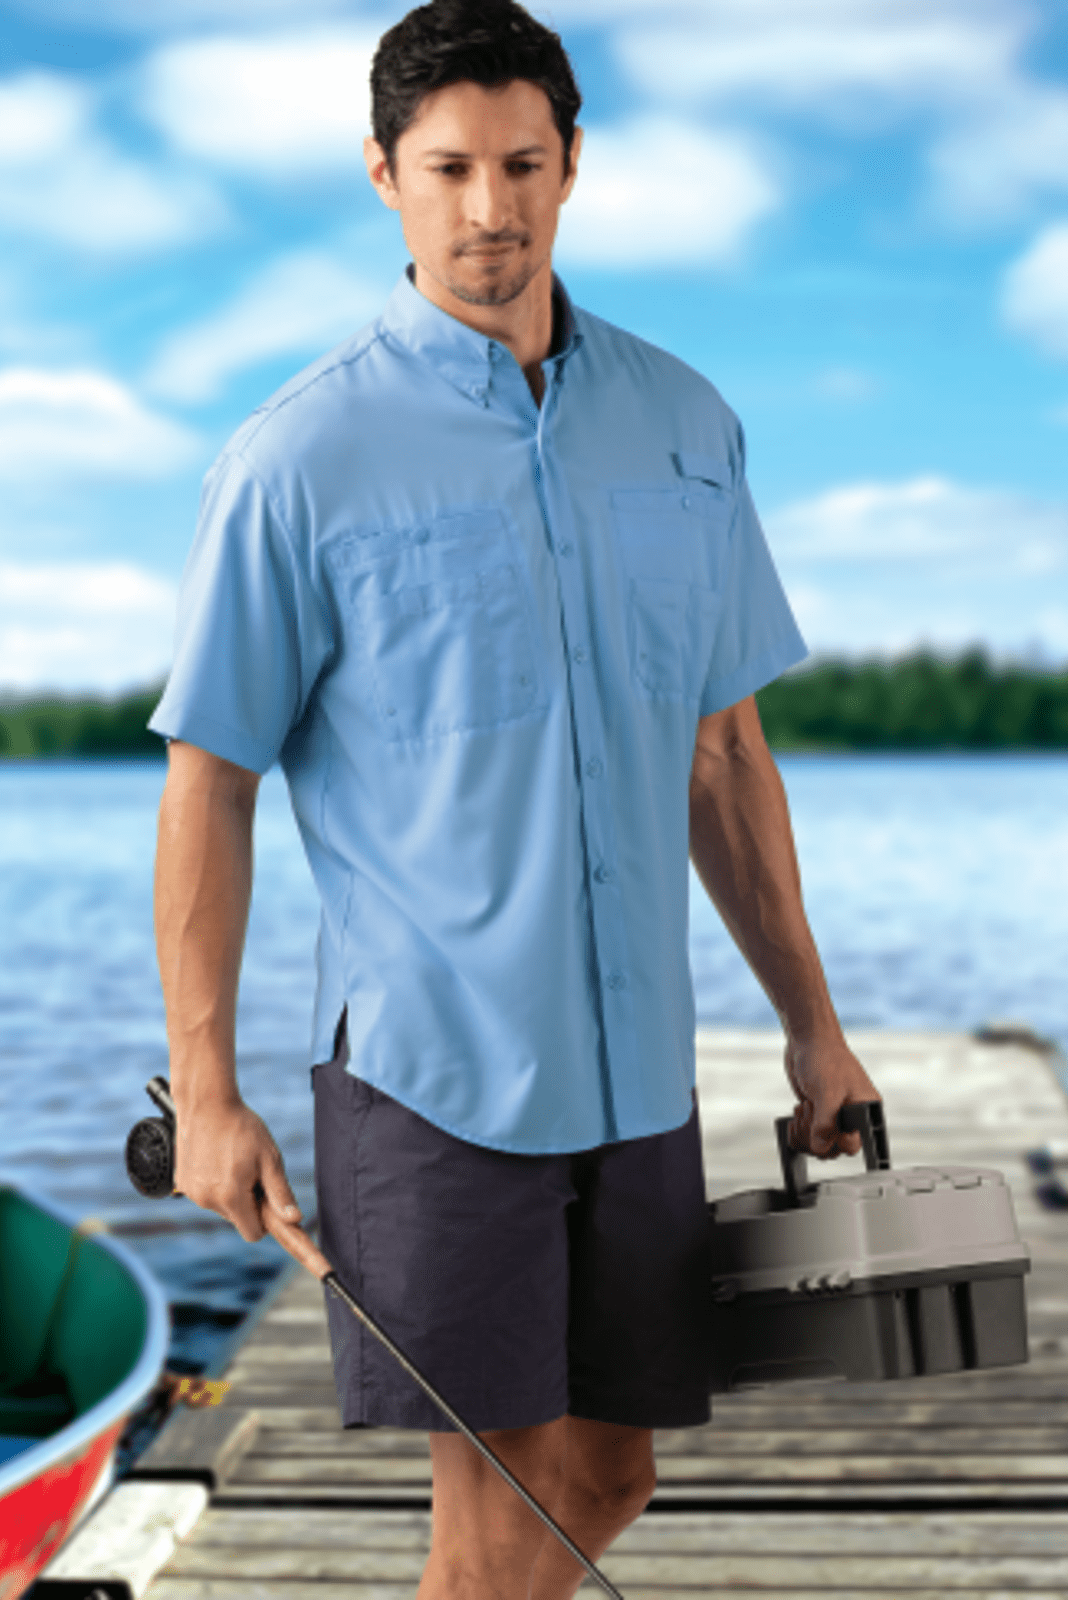 Paragon 700 Hatteras Performance Short Sleeve Fishing Shirt - White - HIT a Double